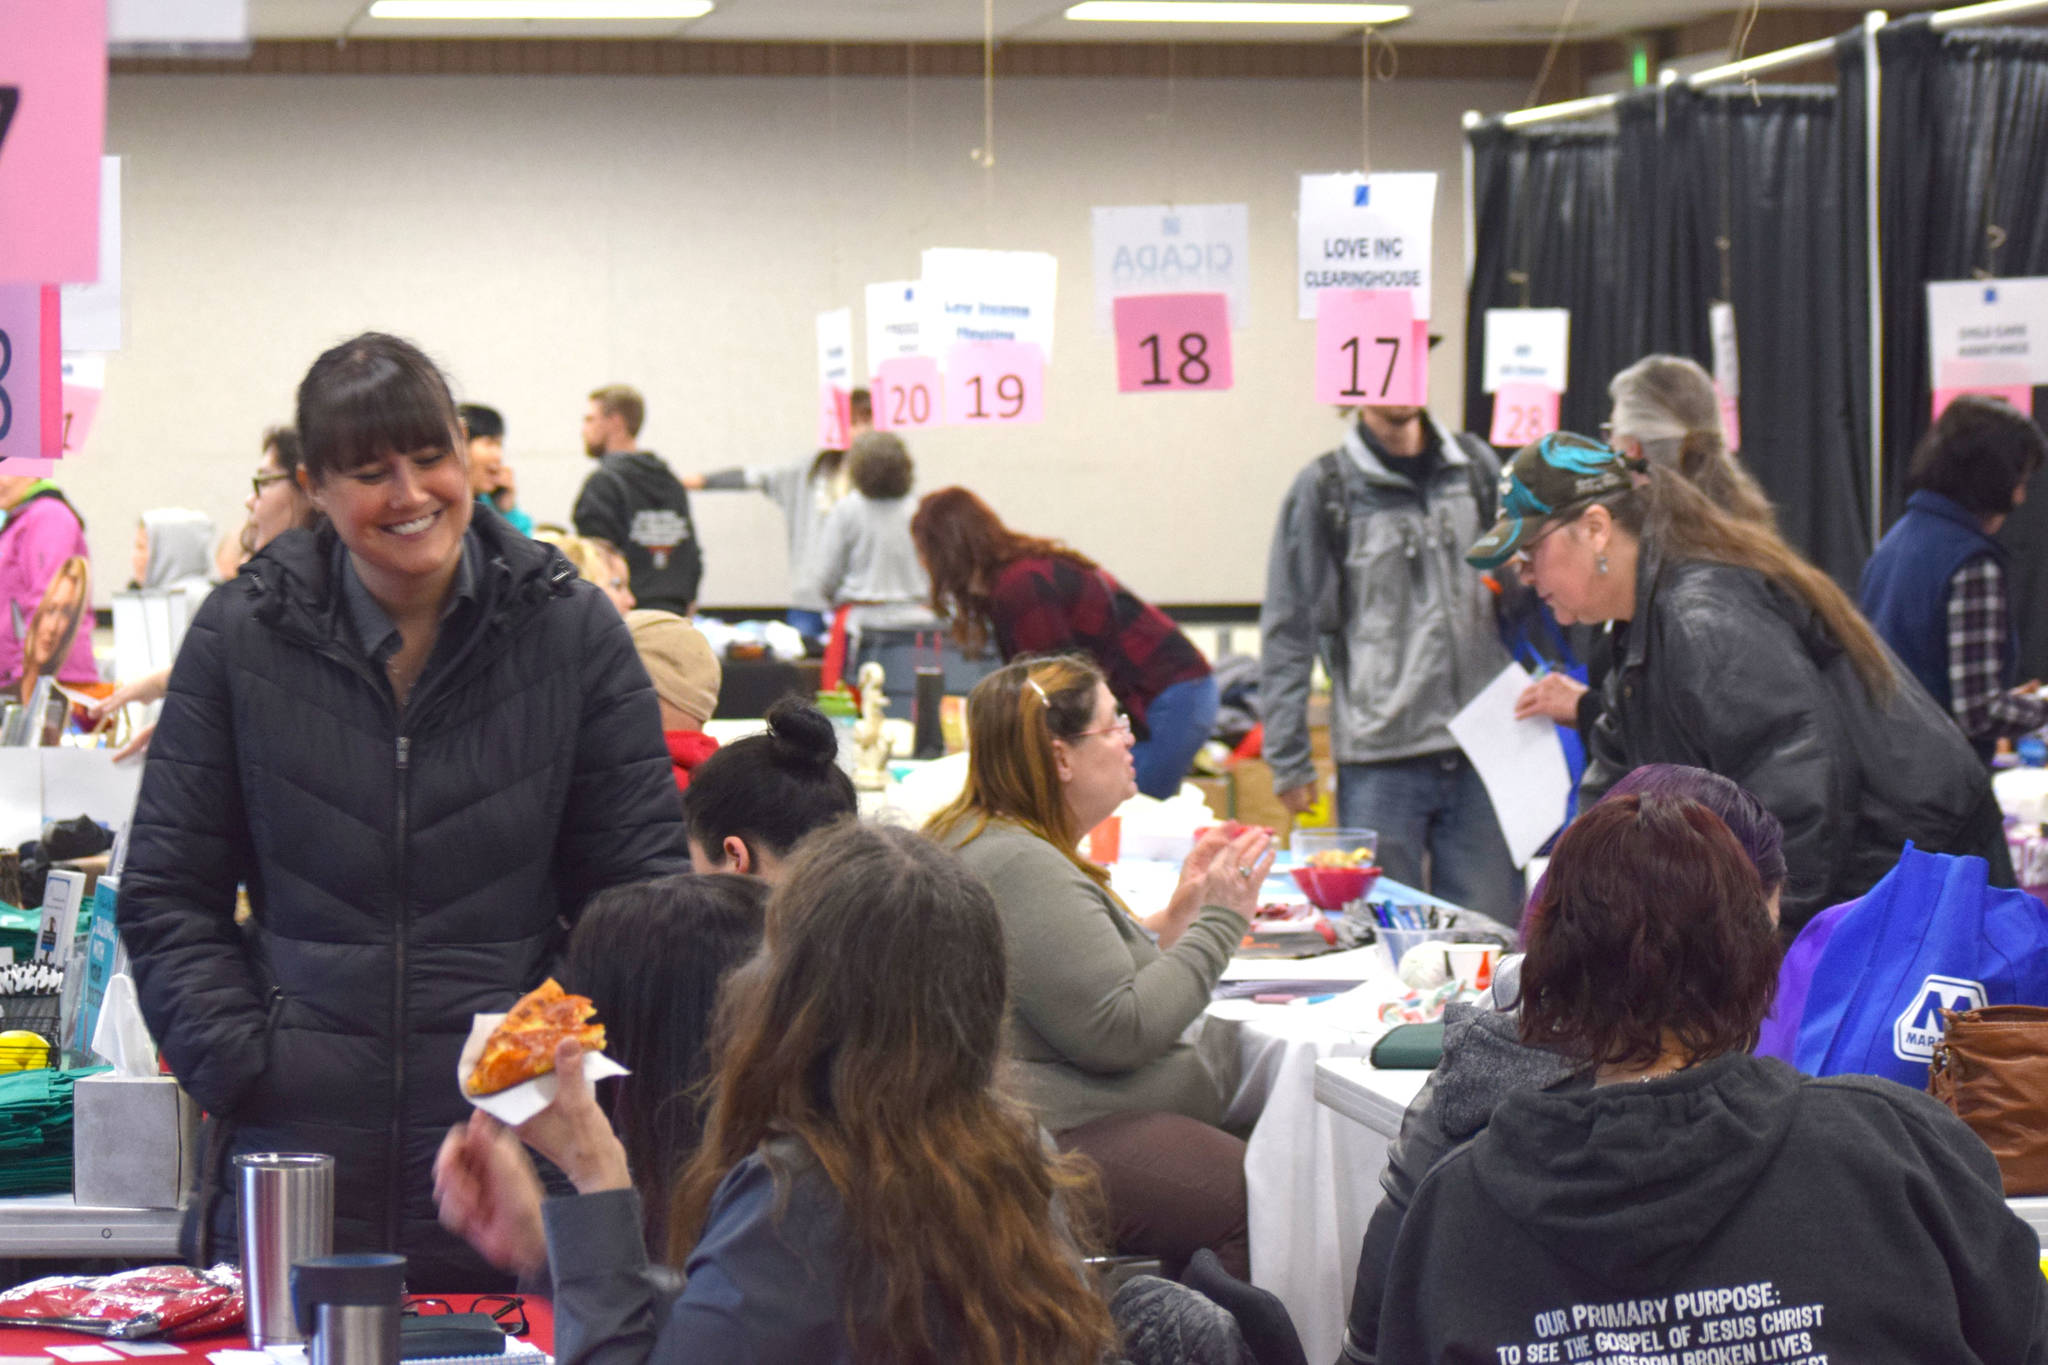 Members of the community come together to provide a variety of services during Project Homeless Connect at the Soldotna Regional Sports Complex on Wednesday, Jan. 23, 2019. (Photo by Brian Mazurek/Peninsula Clarion)